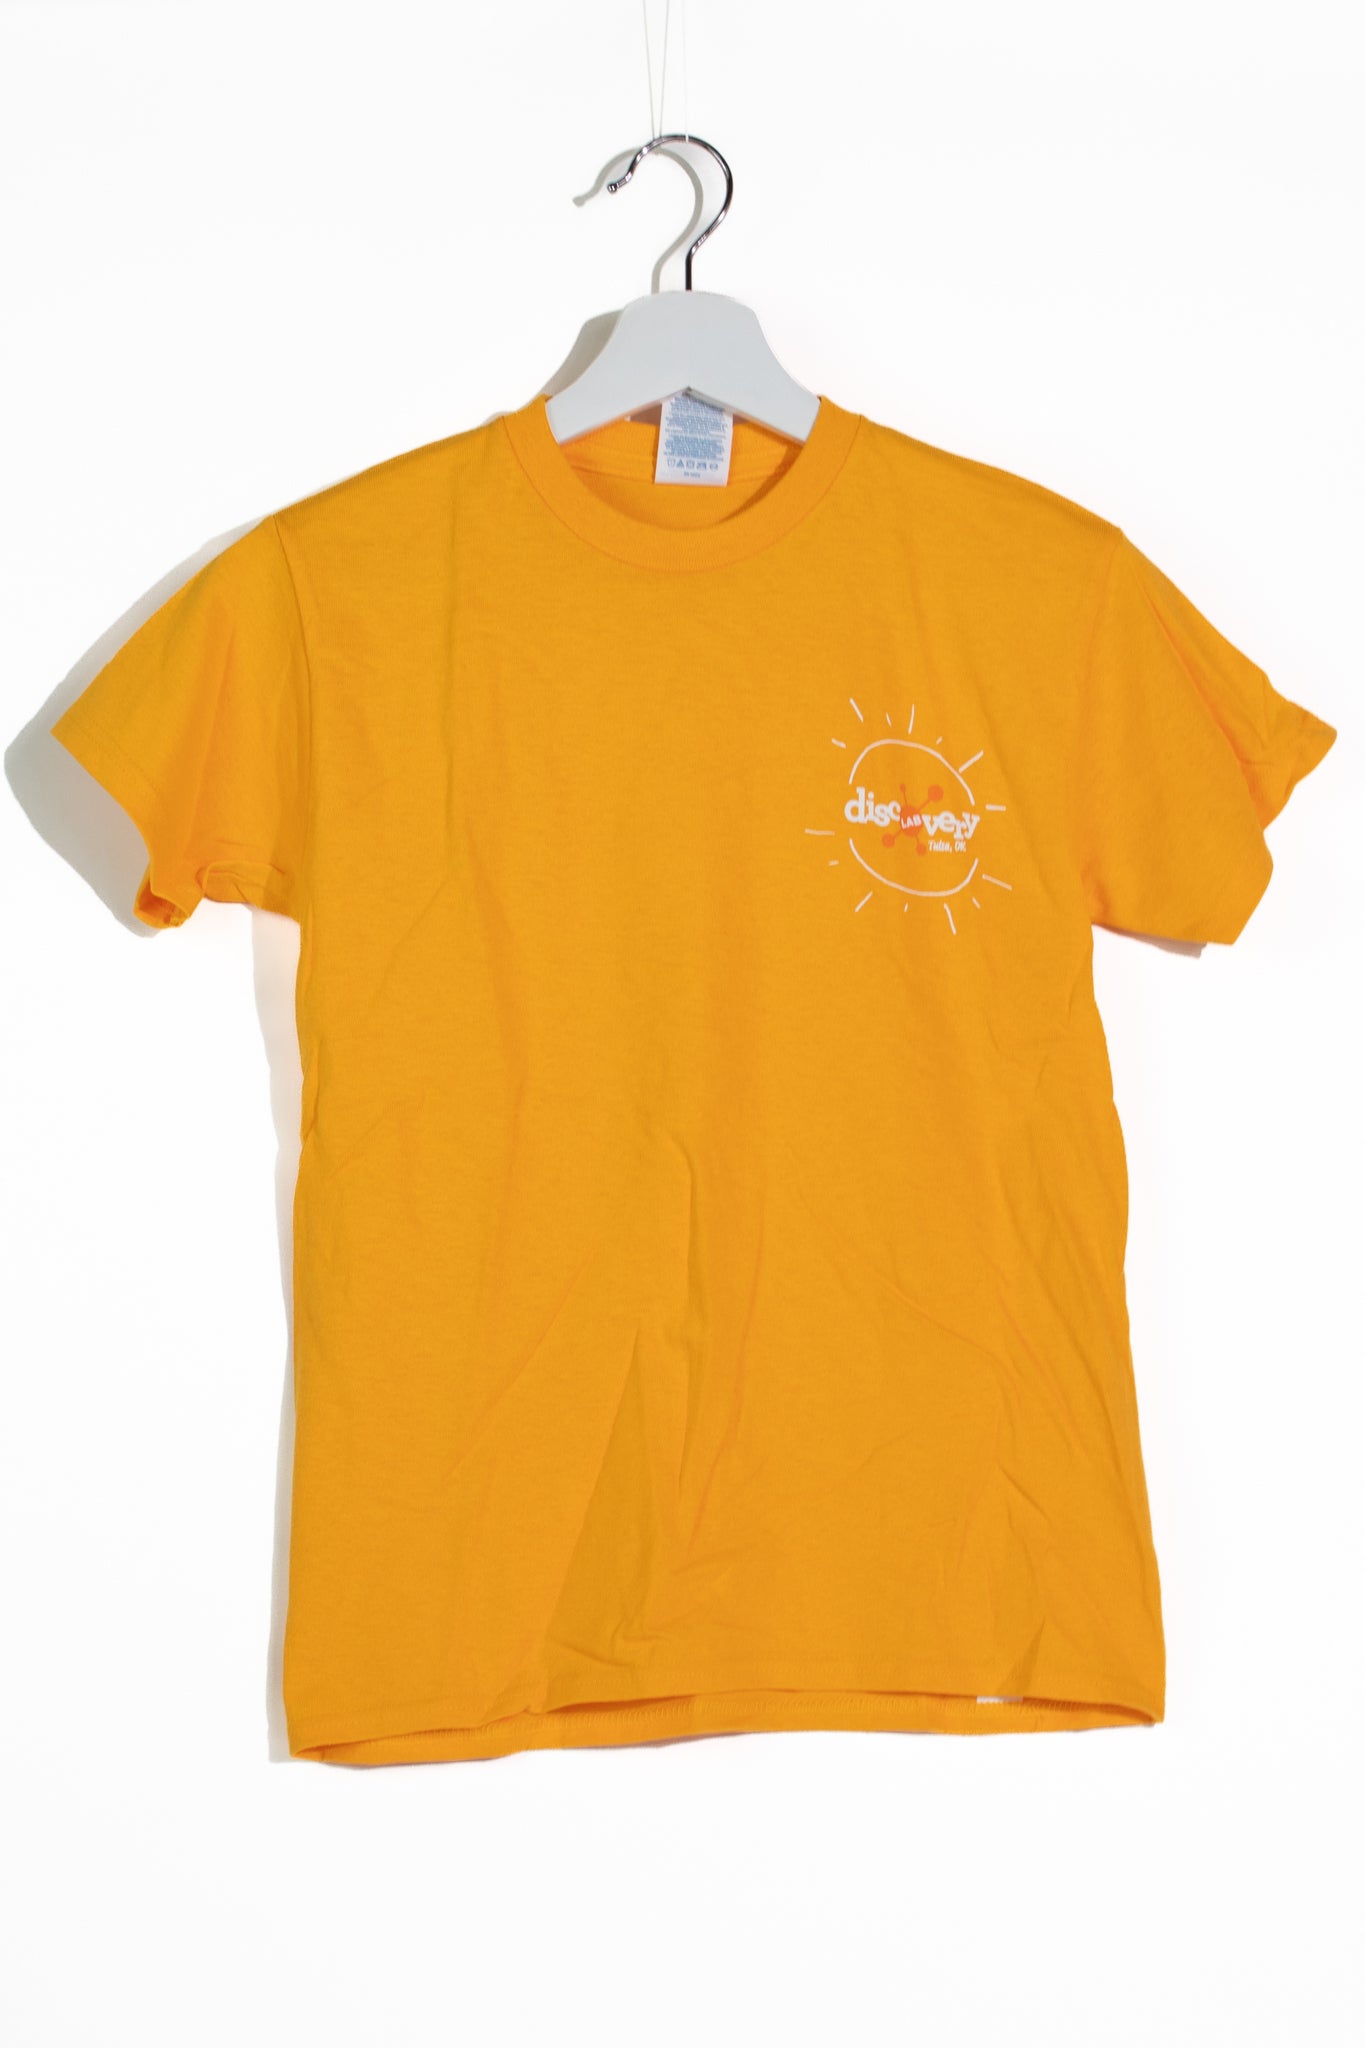 Discovery Lab Summer Tee Orange - Stemcell Science Shop